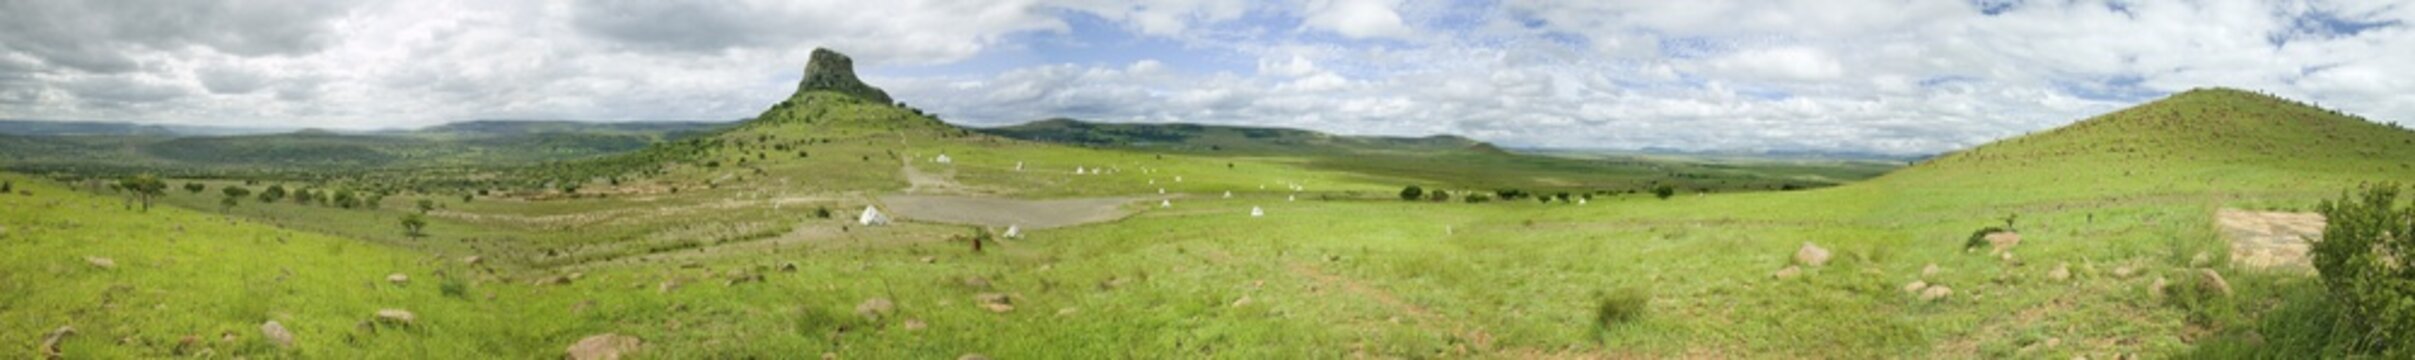 Panoramic view of Sandlwana hill or Sphinx with soldiers graves in foreground, the scene of the Anglo Zulu battle site of January 22, 1879. The great Battlefield of Isandlwana and the Oskarber, Zululand, northern Kwazulu Natal, South Africa